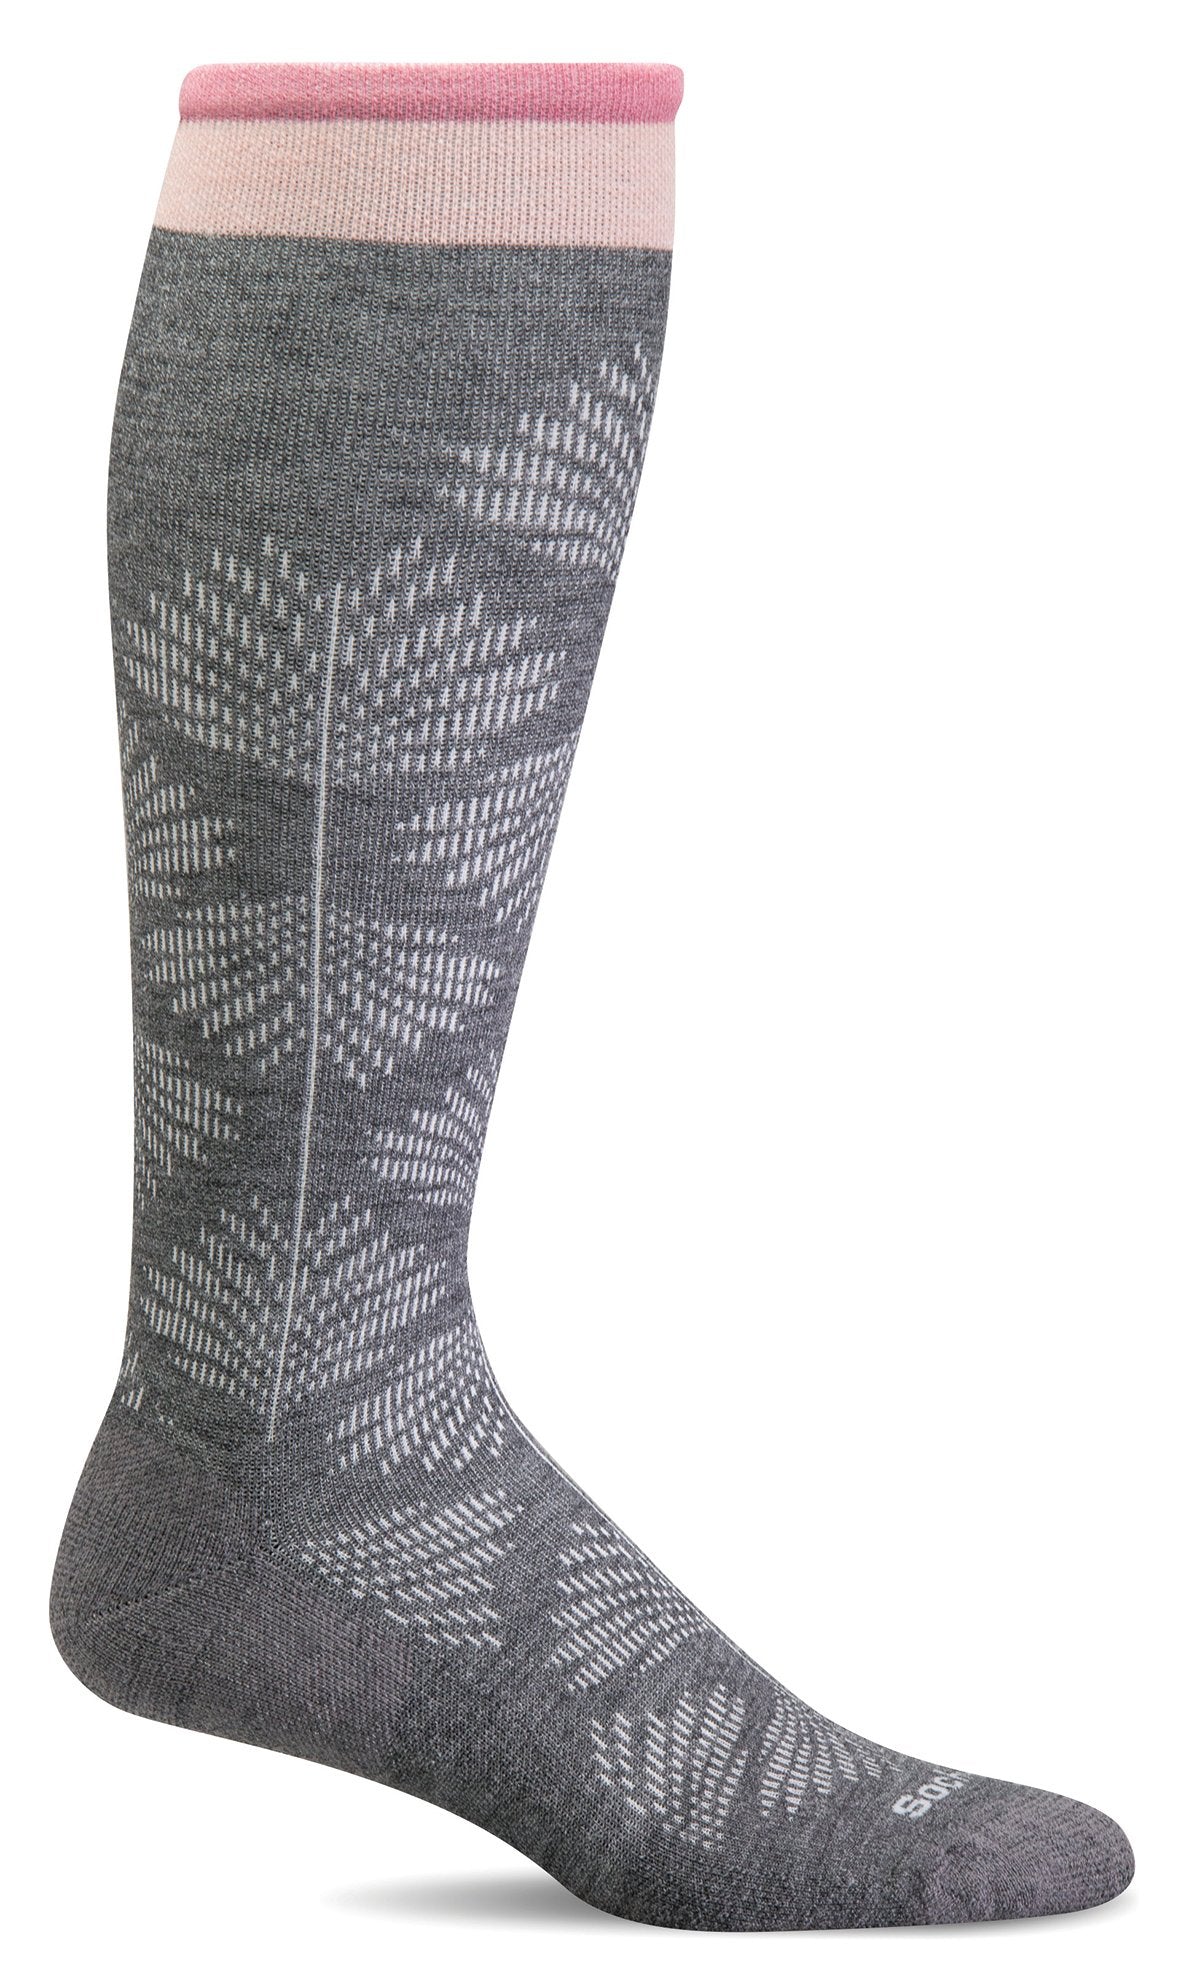 Full Floral Women's Bamboo/Merino Moderate Graduated Compression Socks in Charcoal- Wide Calf Fit - The Sockery